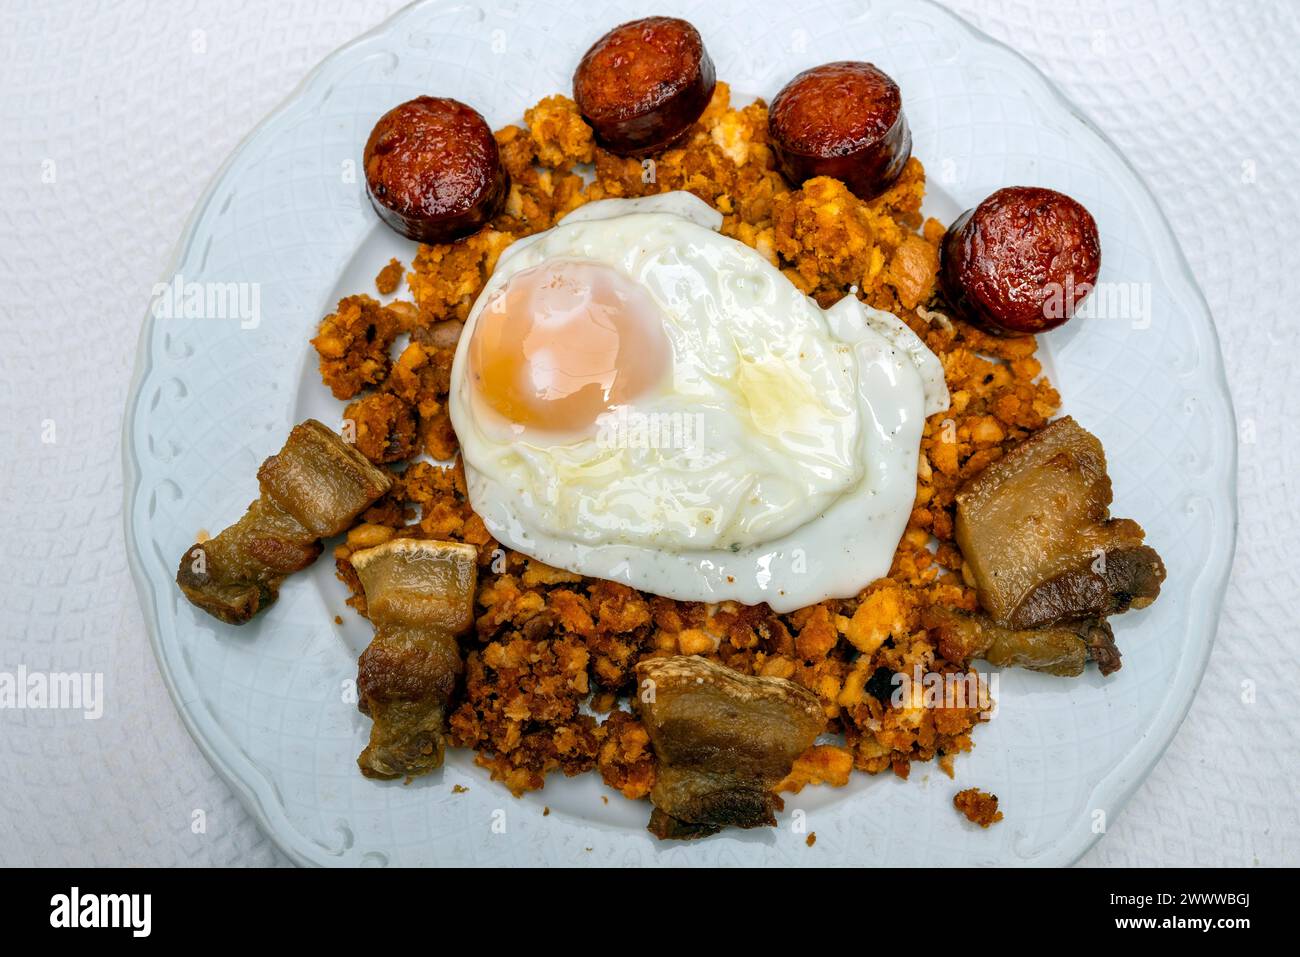 Typical 'migas' stale bread dish served with sausage and fried egg, Guadalupe, Extremadura, Spain Stock Photo